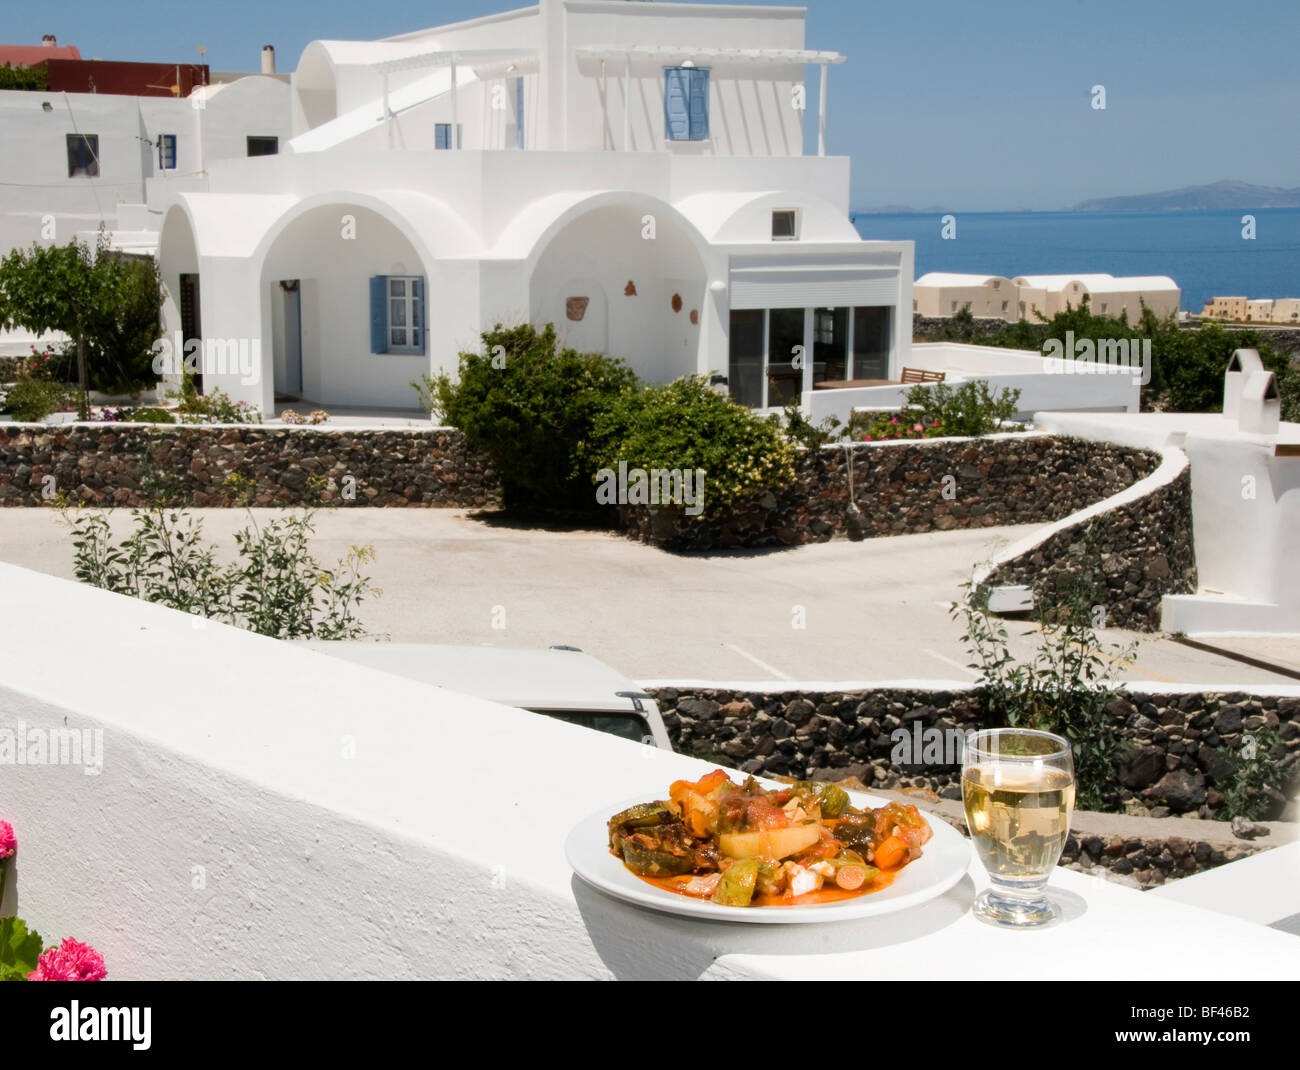 greece greek food vegetables architecture residence cyclades islands mediterranean aegean view landscape scenic seascape sea mix Stock Photo